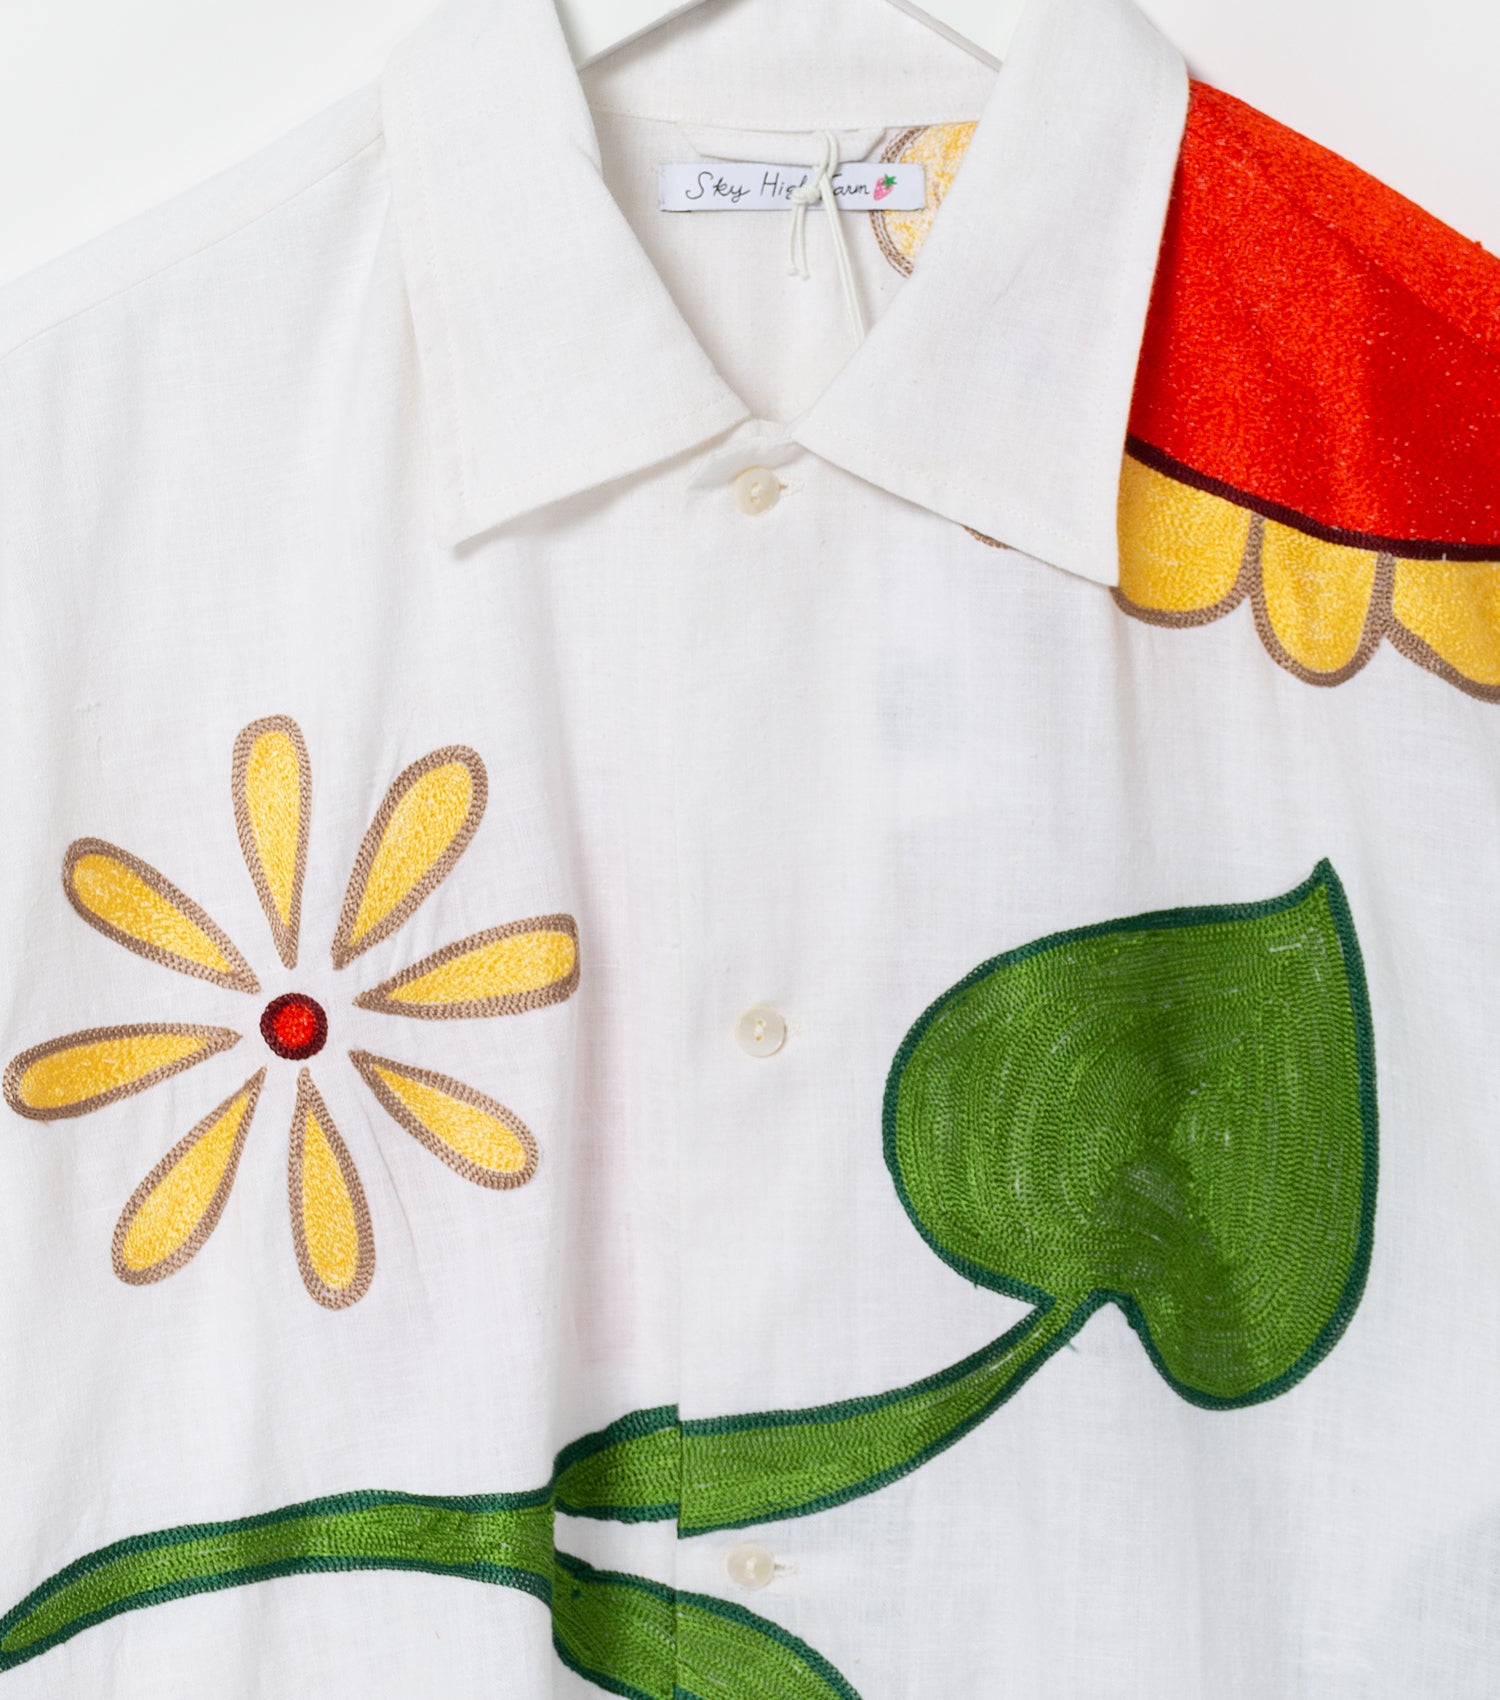 BOTICELLI EMBROIDERED FLOWER SHIRT (WHITE)